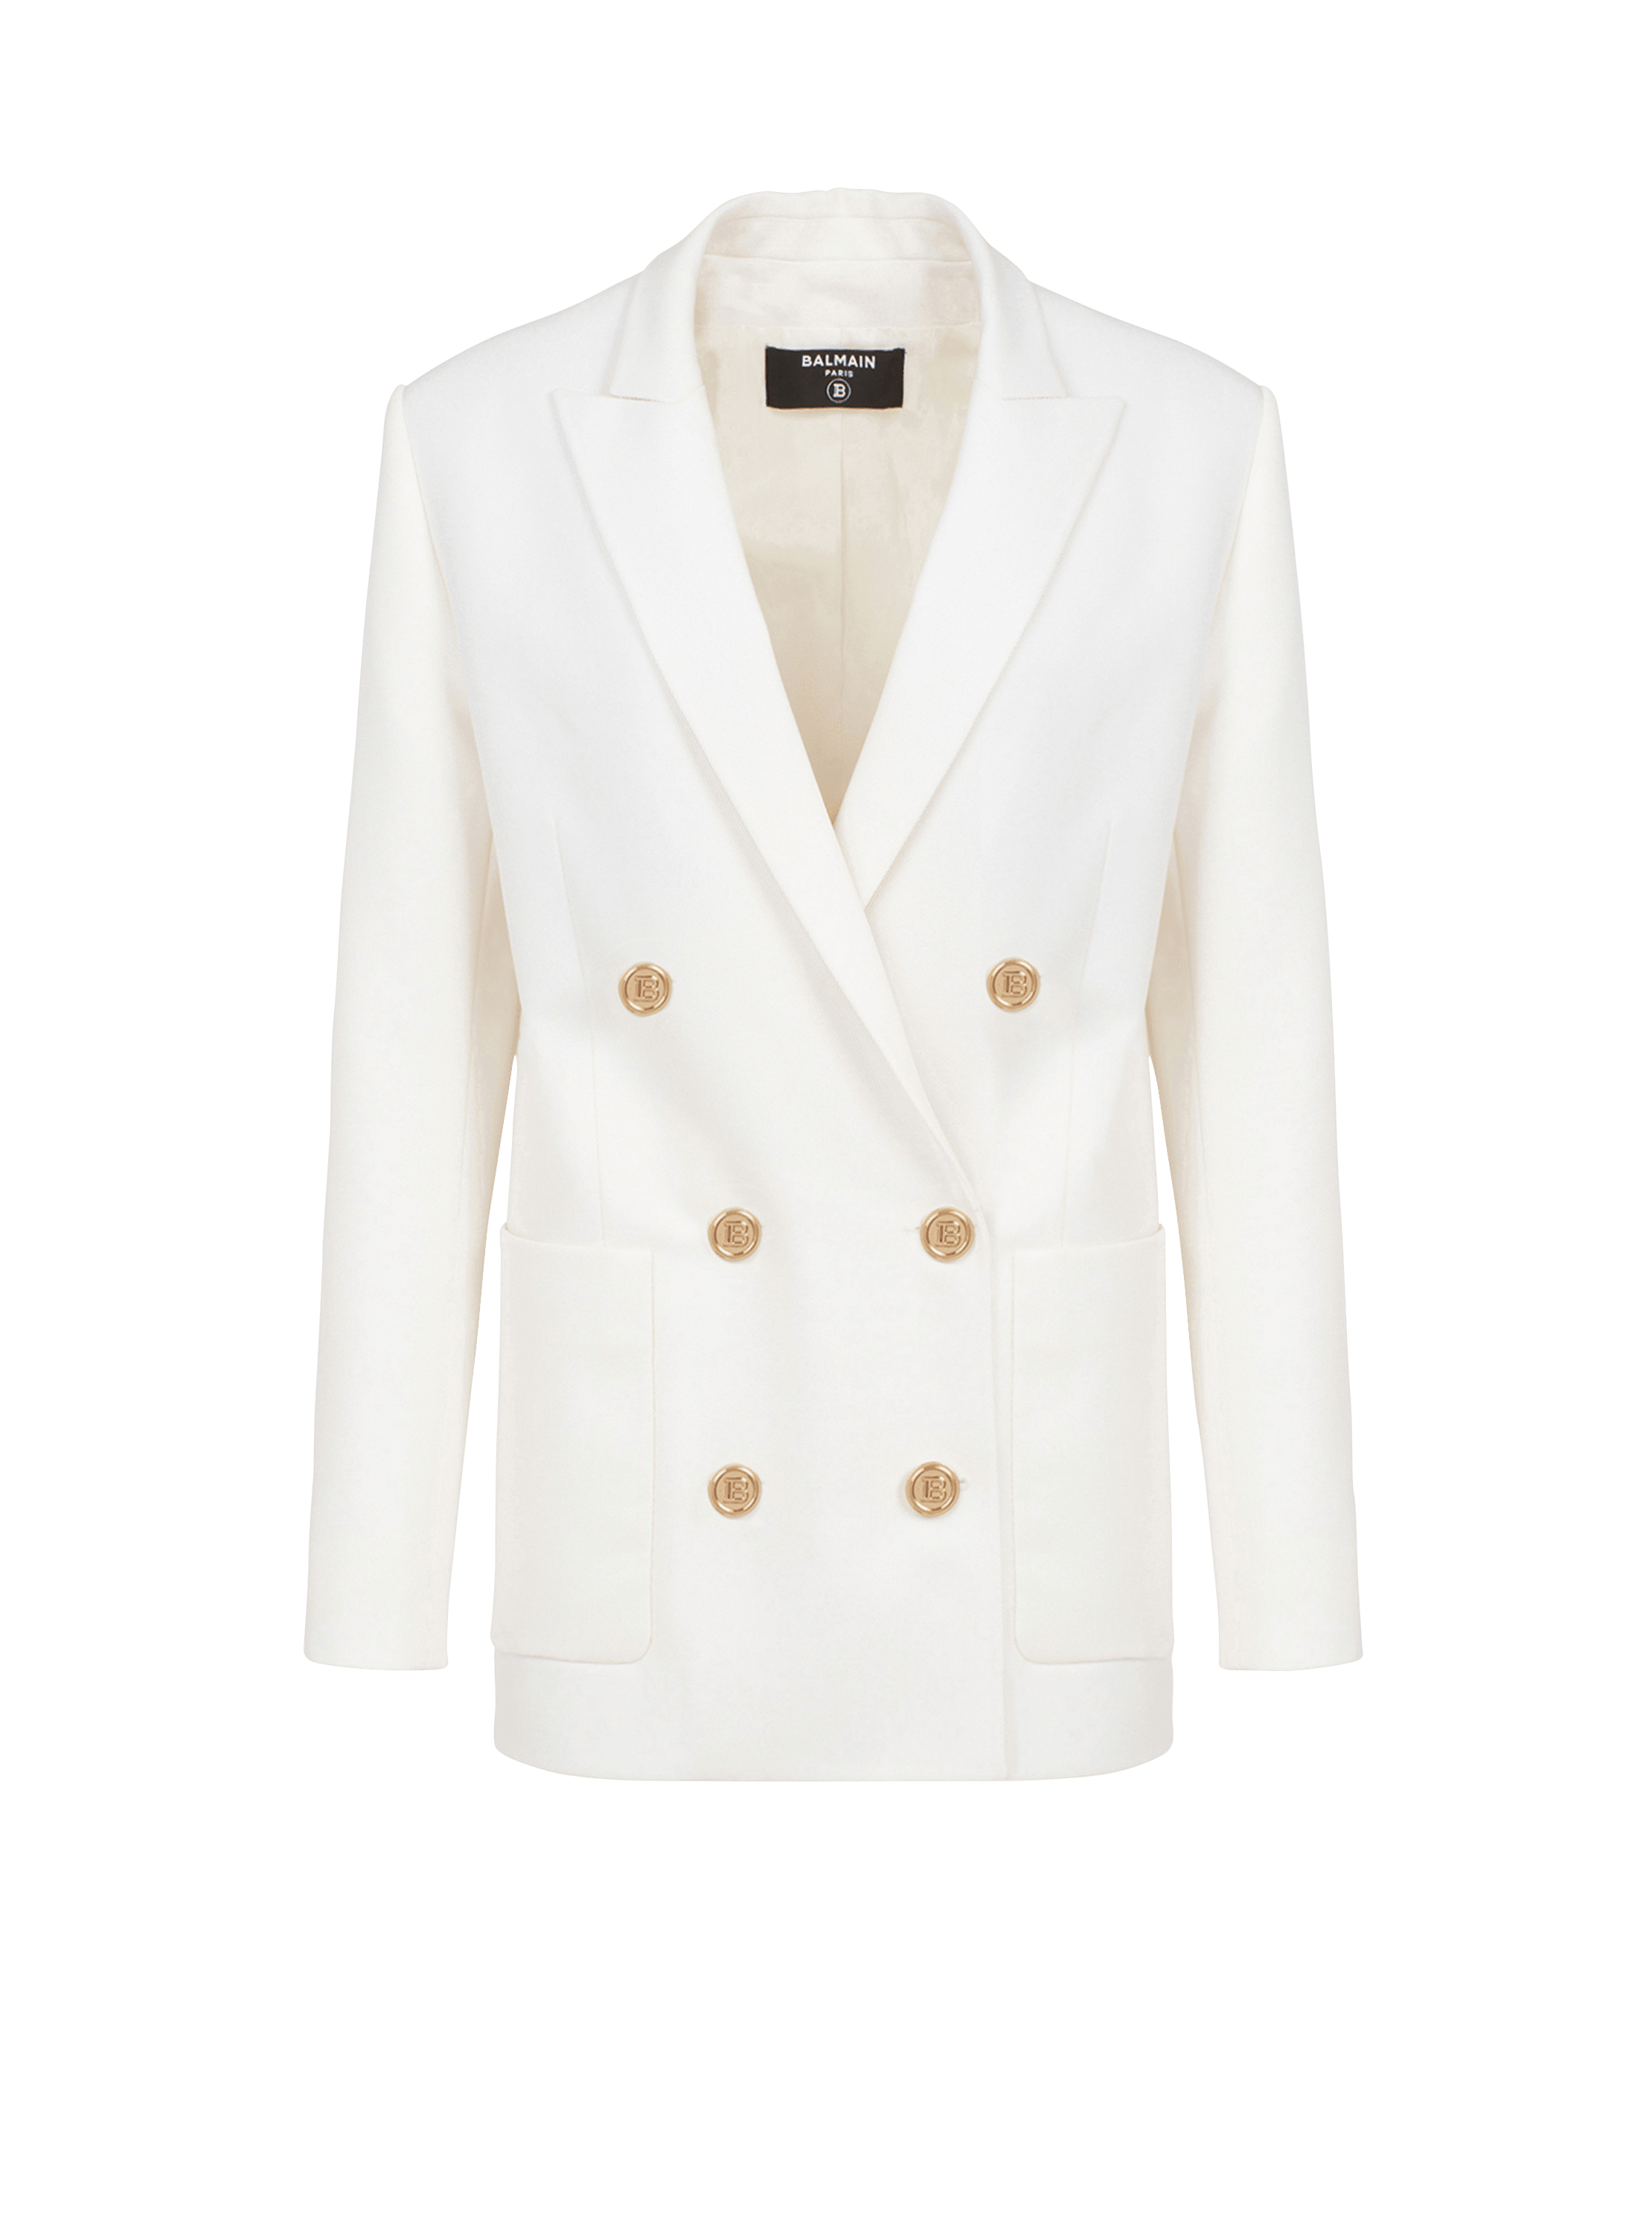 Wool double-breasted boyfriend jacket, white, hi-res